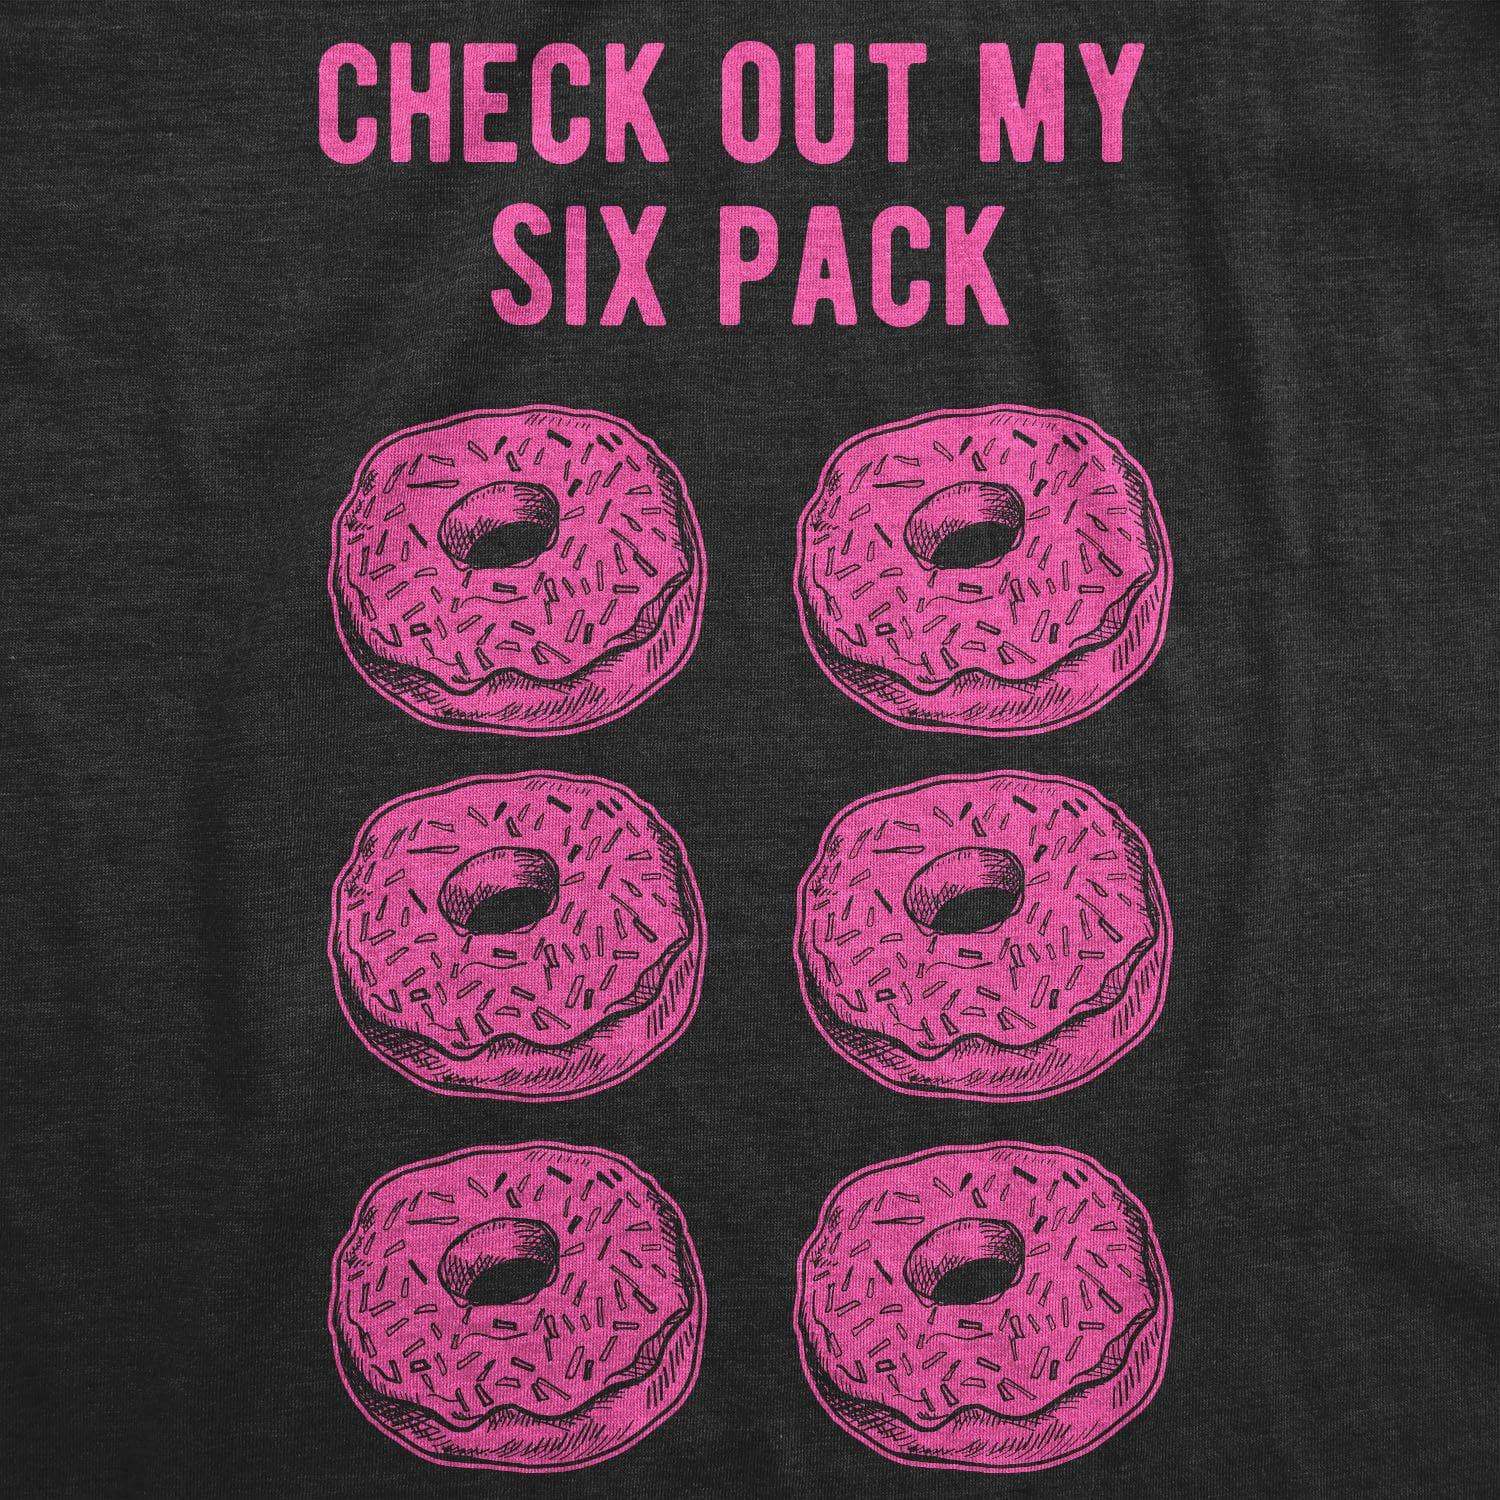 Check Out My Six Pack Donuts Men's Tshirt - Crazy Dog T-Shirts